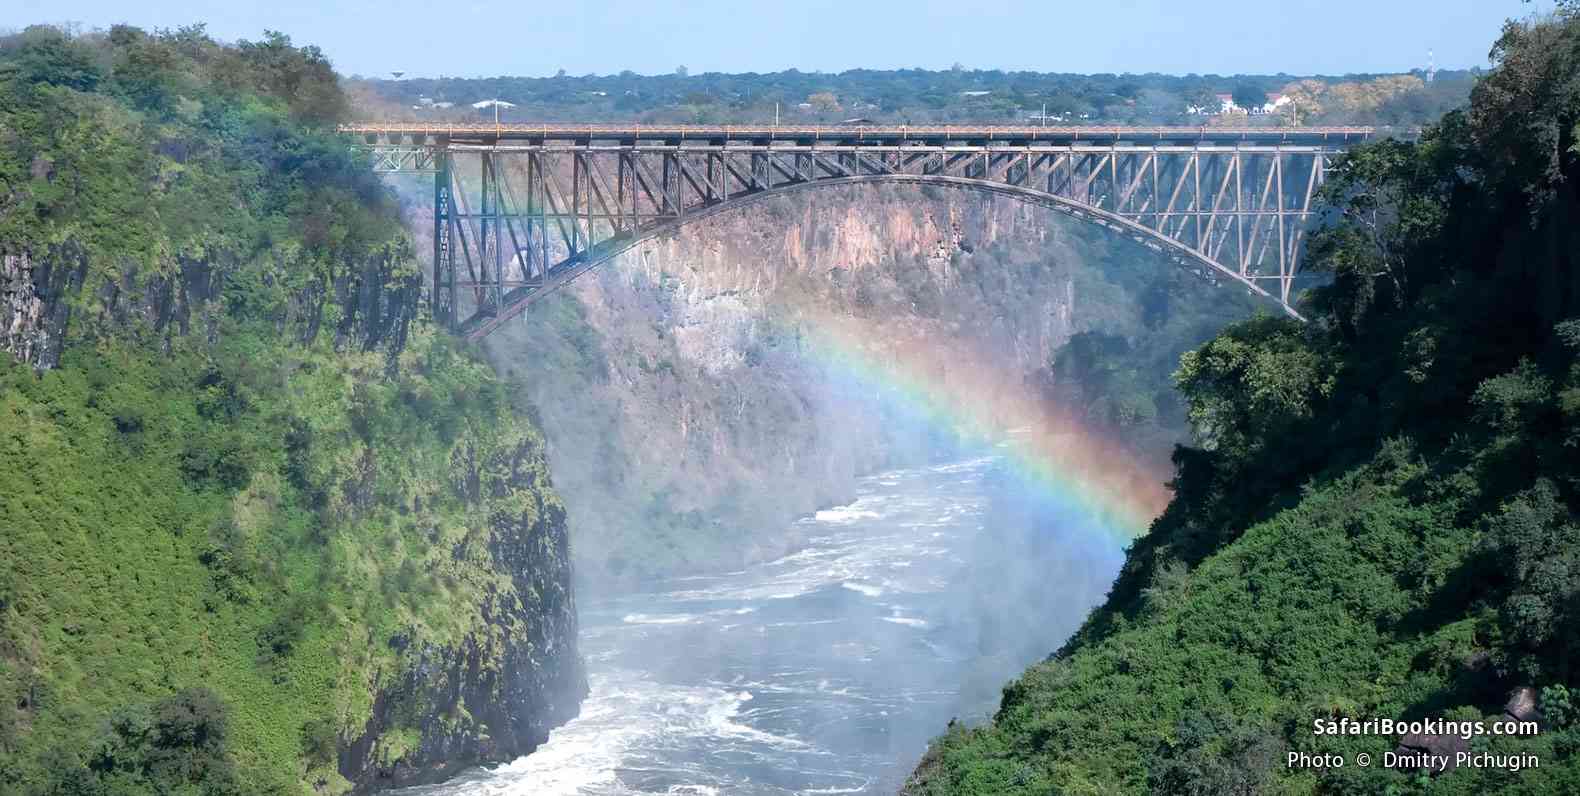 The Victoria Falls Bridge, which connects two countries